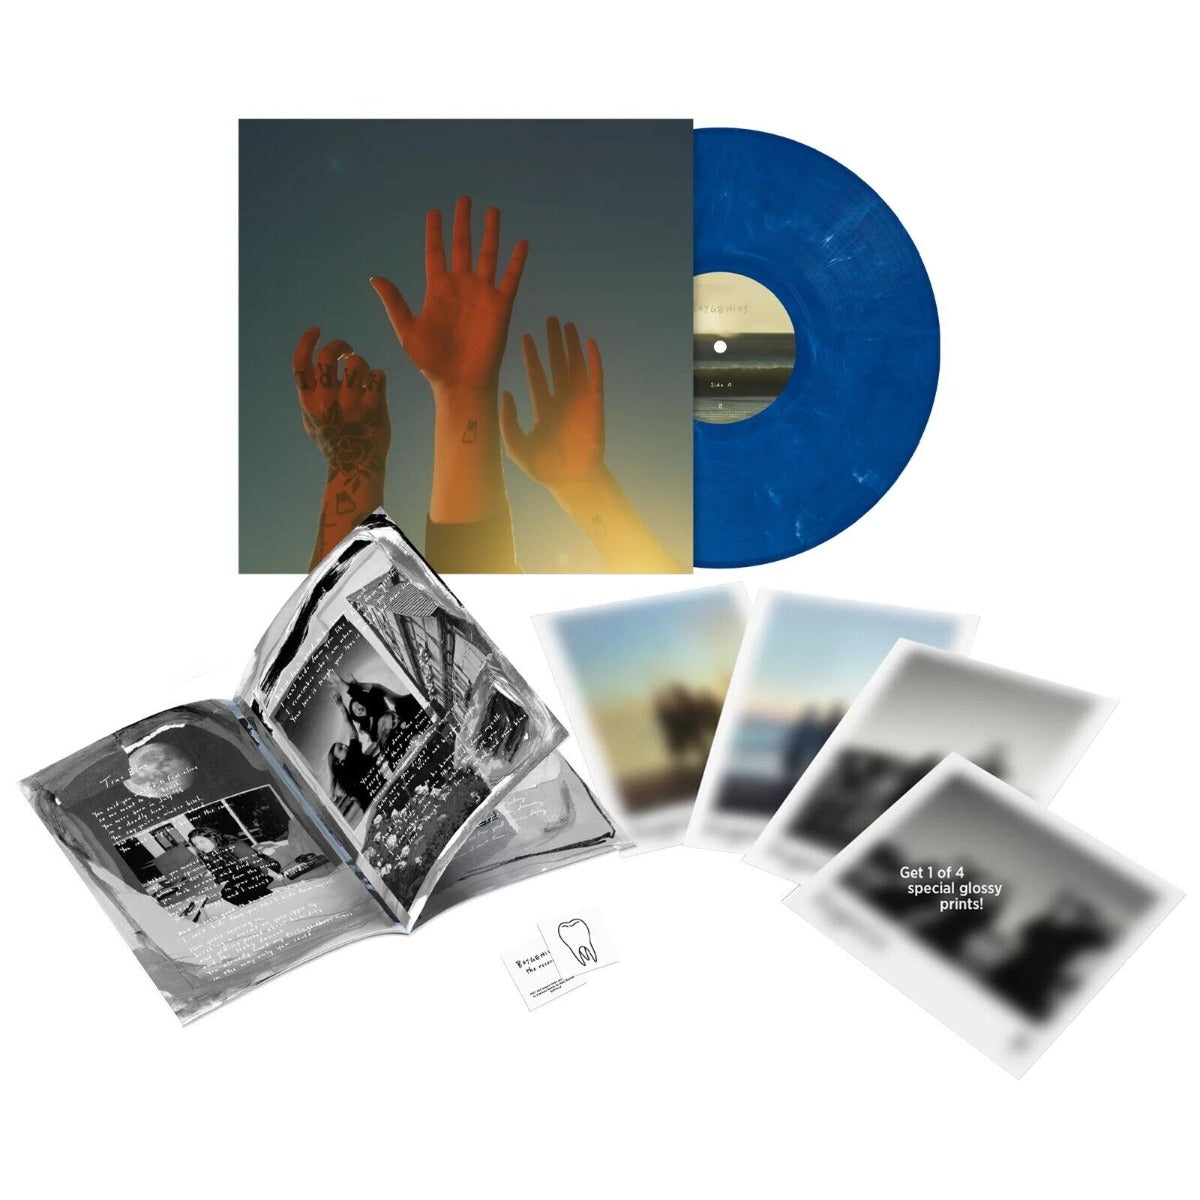 Boygenius | The Record (Limited Edition, Blue Jay Swirl Colored Vinyl, With Magazine) [Import] | Vinyl